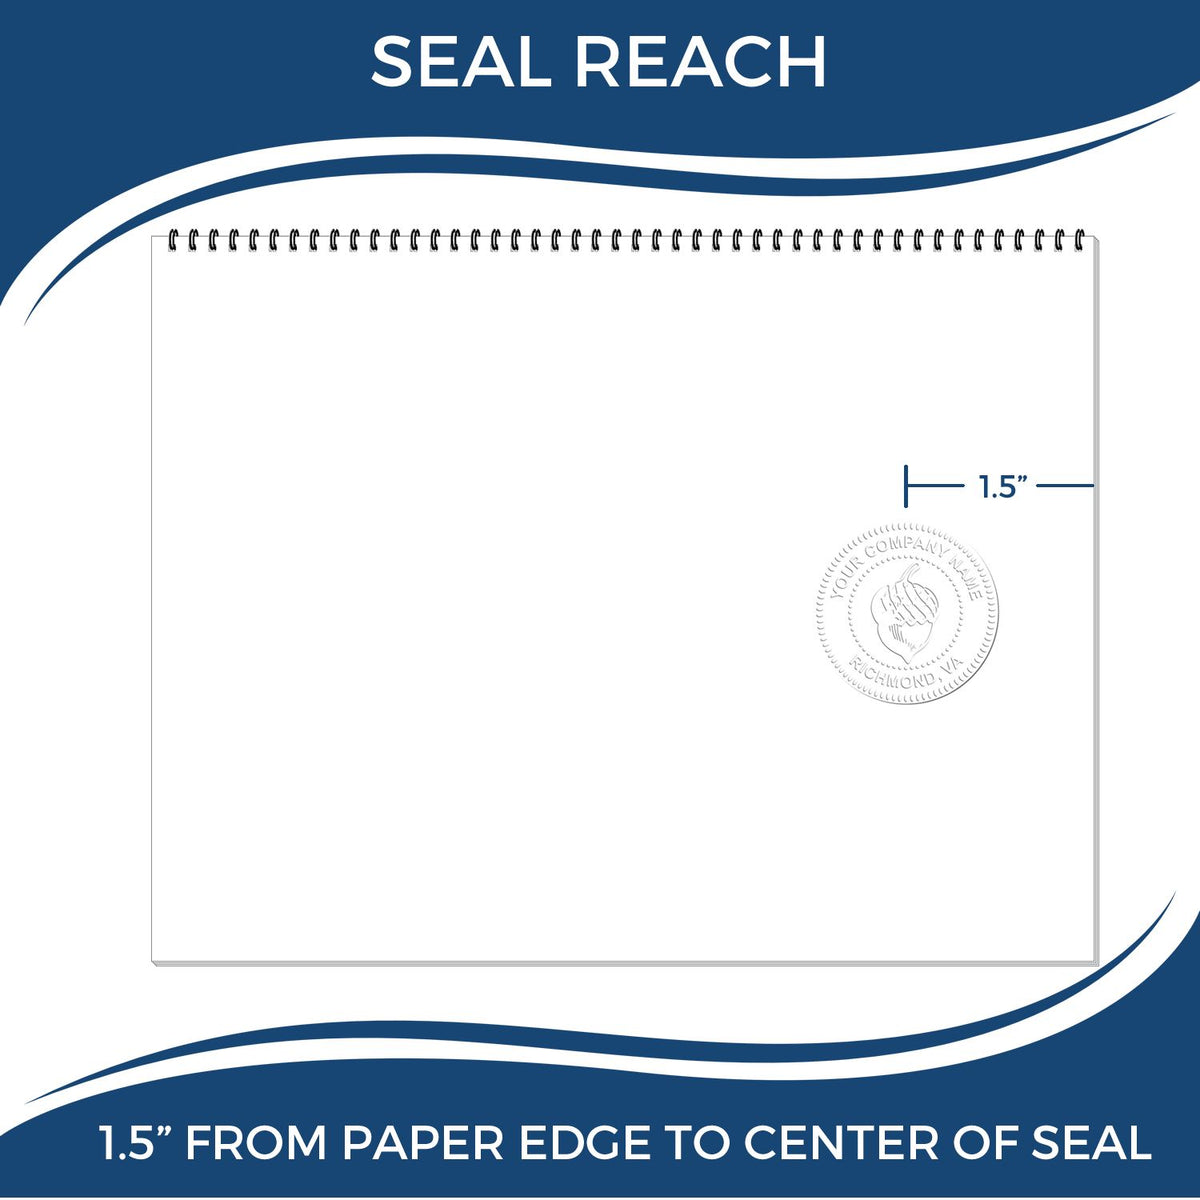 An infographic showing the seal reach which is represented by a ruler and a miniature seal image of the Gift Mississippi Geologist Seal